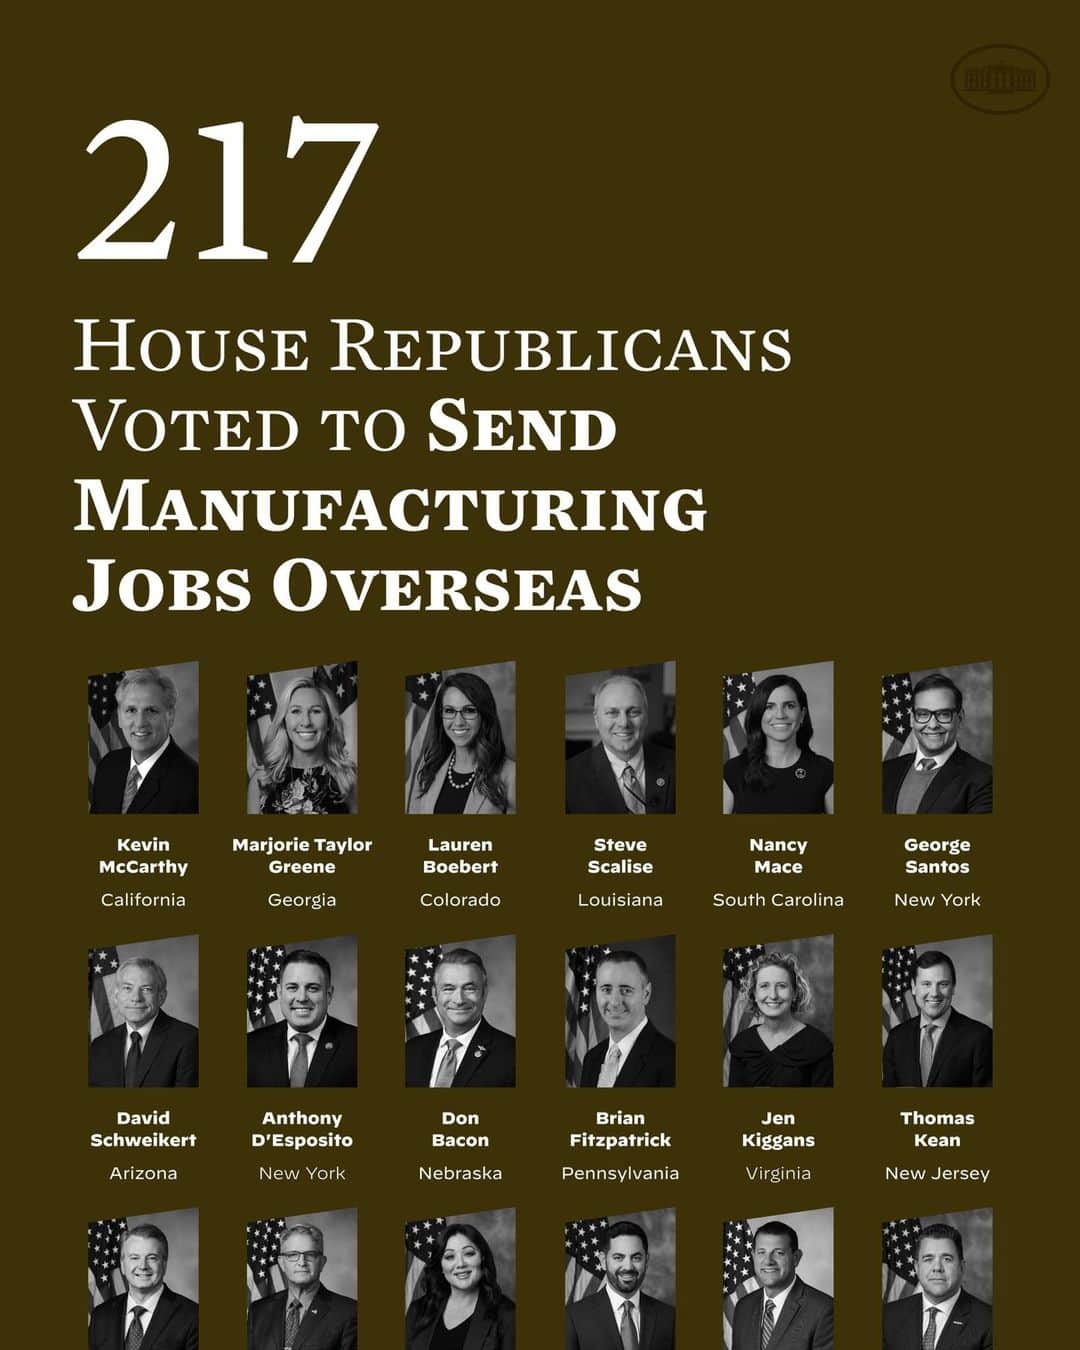 The White Houseのインスタグラム：「President Biden has created nearly 800,000 new manufacturing jobs since taking office.  House Republicans are working to undo this progress and send these jobs overseas.」